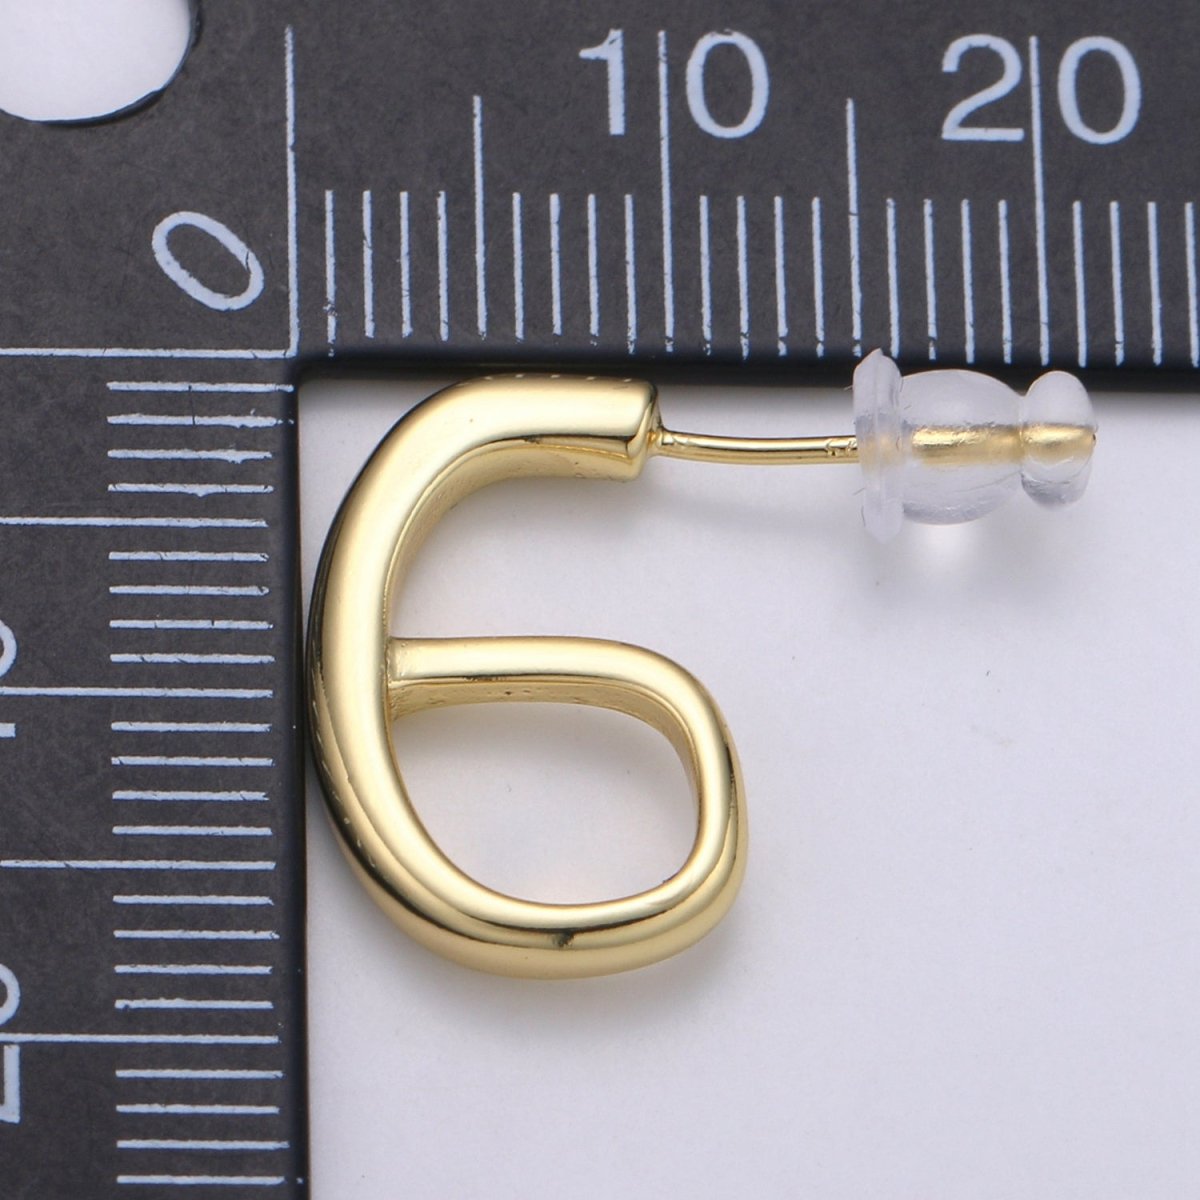 17.5 mm "G" Hoops 14K Gold Plated, 6 Gold Earrings for DIY Earring Craft Supply Jewelry Making Q-409 - DLUXCA